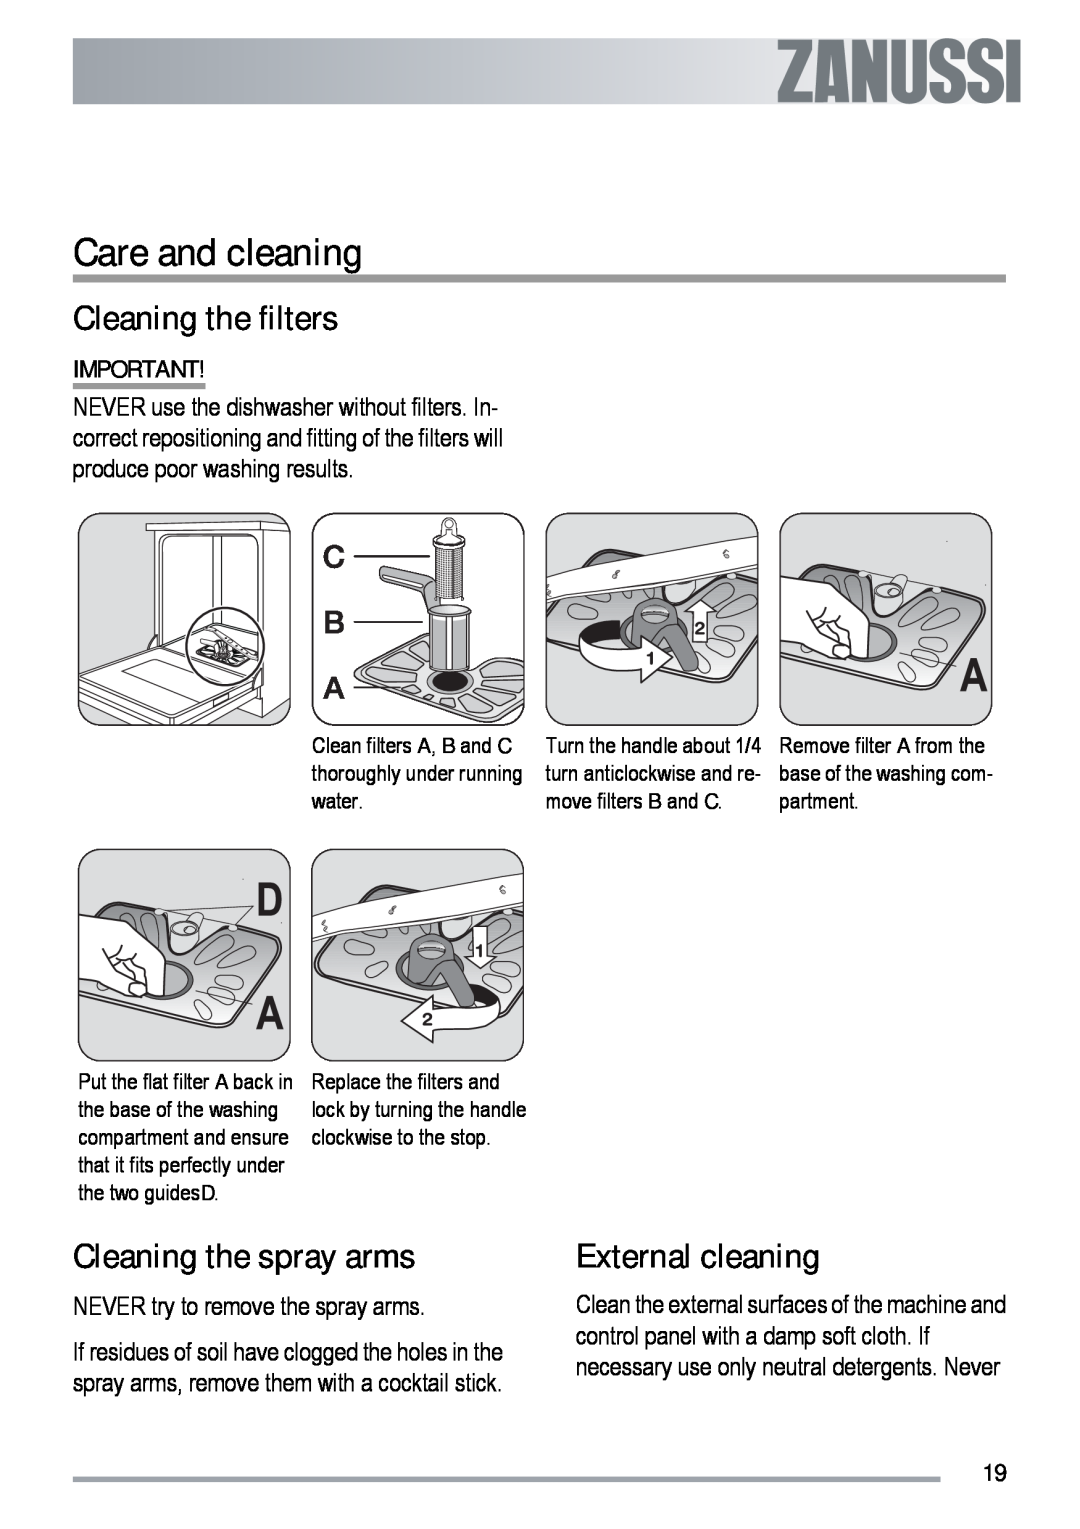 Zanussi ZDF 312 user manual Care and cleaning, Cleaning the filters, Cleaning the spray arms, External cleaning 